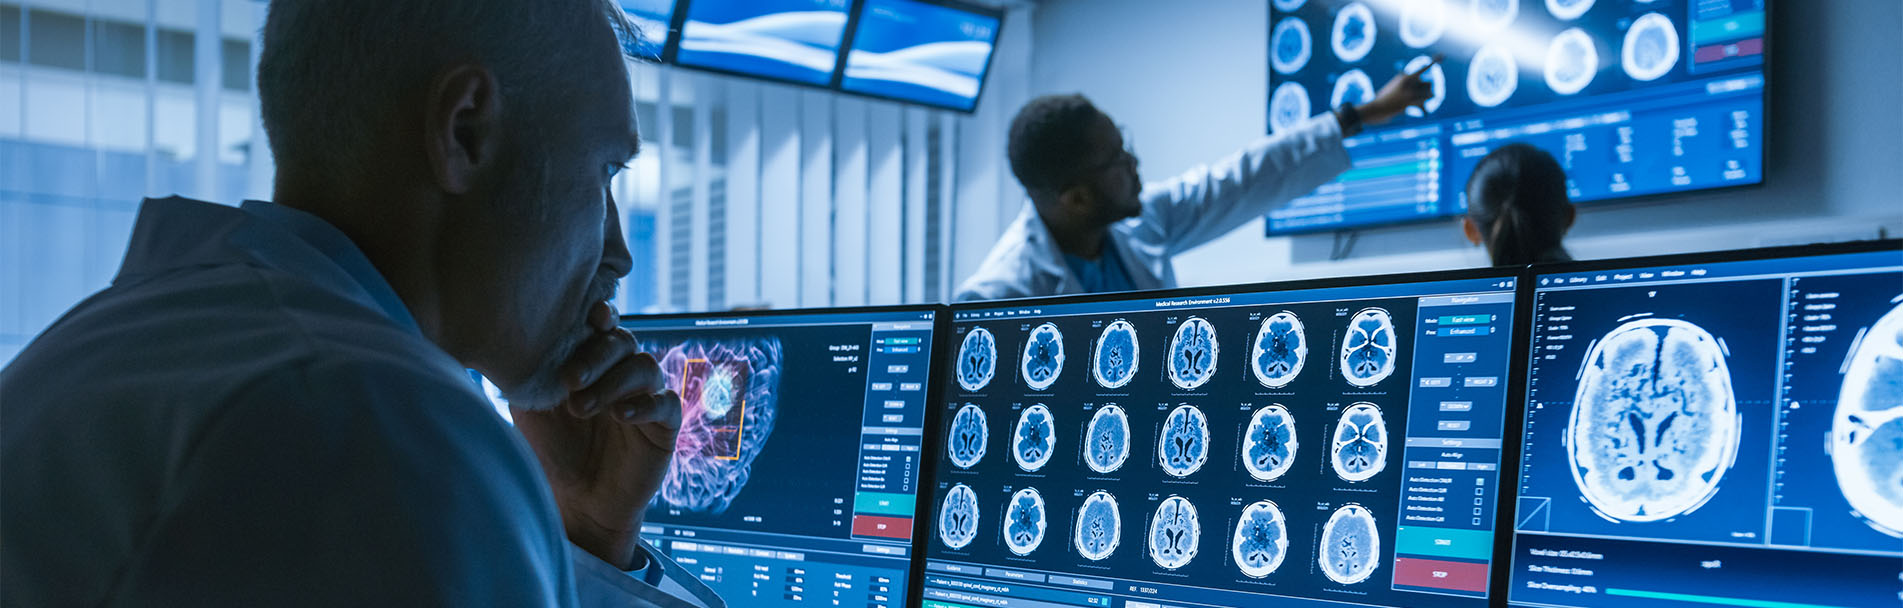 Over the Shoulder Shot of Senior Medical Scientist Working with CT Brain Scan Images on a Personal Computer in Laboratory. Neurologists in Research Center Work on Brain Tumor Cure.